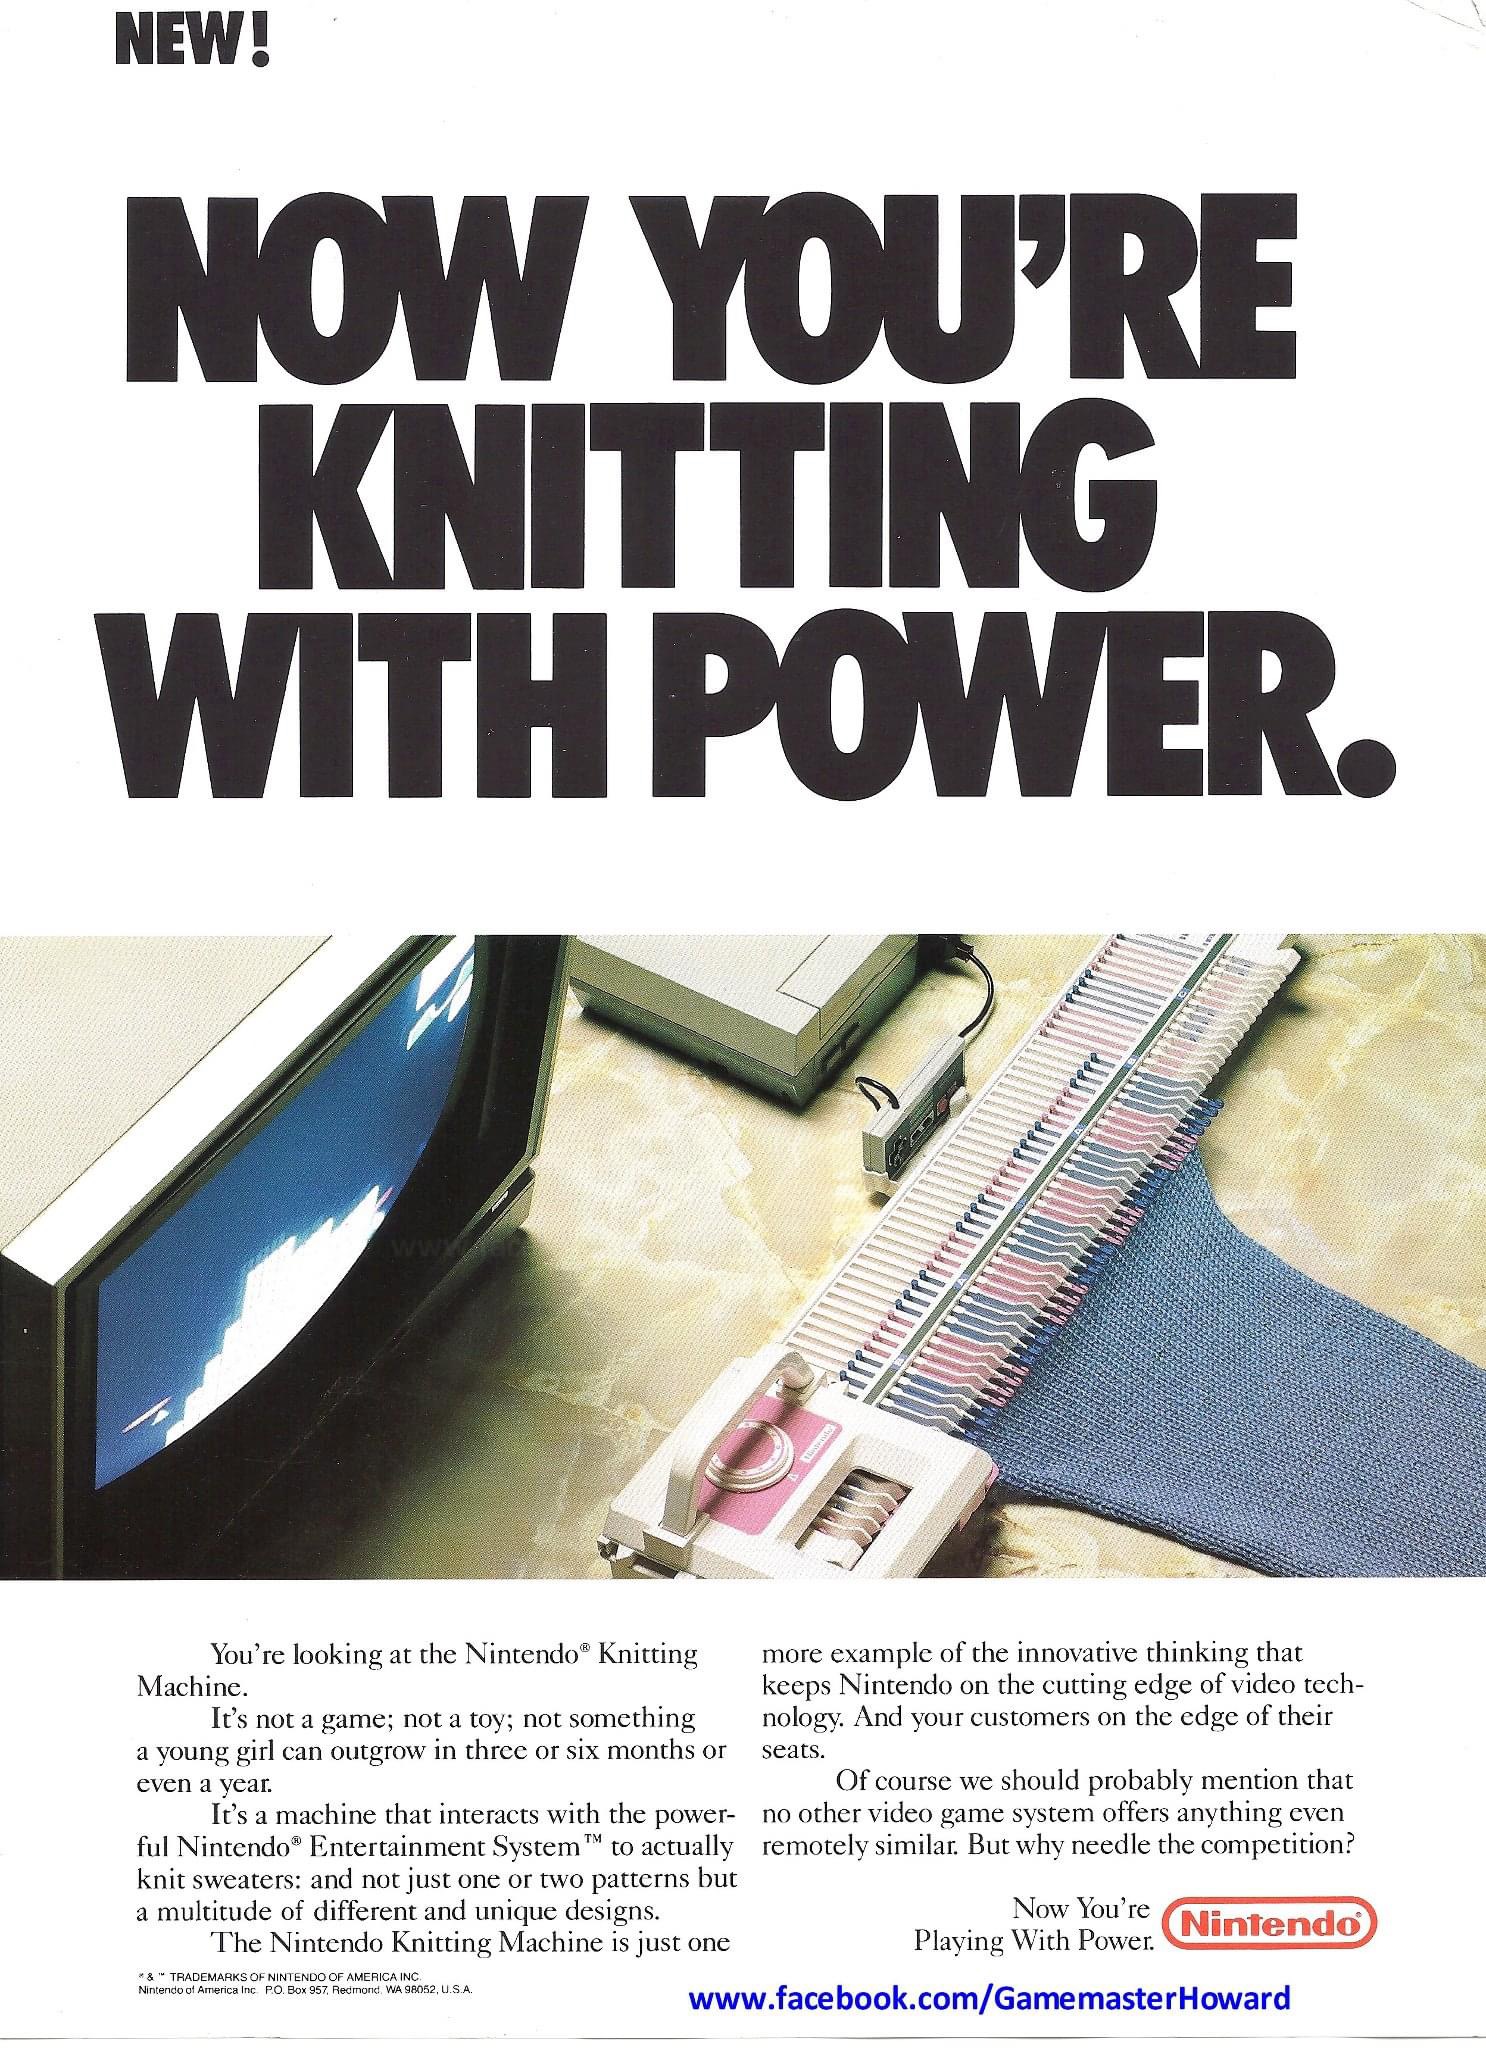 Now You're Knitting With Power - advertisment showing a knitting machine with partially-worked knitting, a CRT TV showing some kind of guide or instructions, and a Nintendo Entertainment System